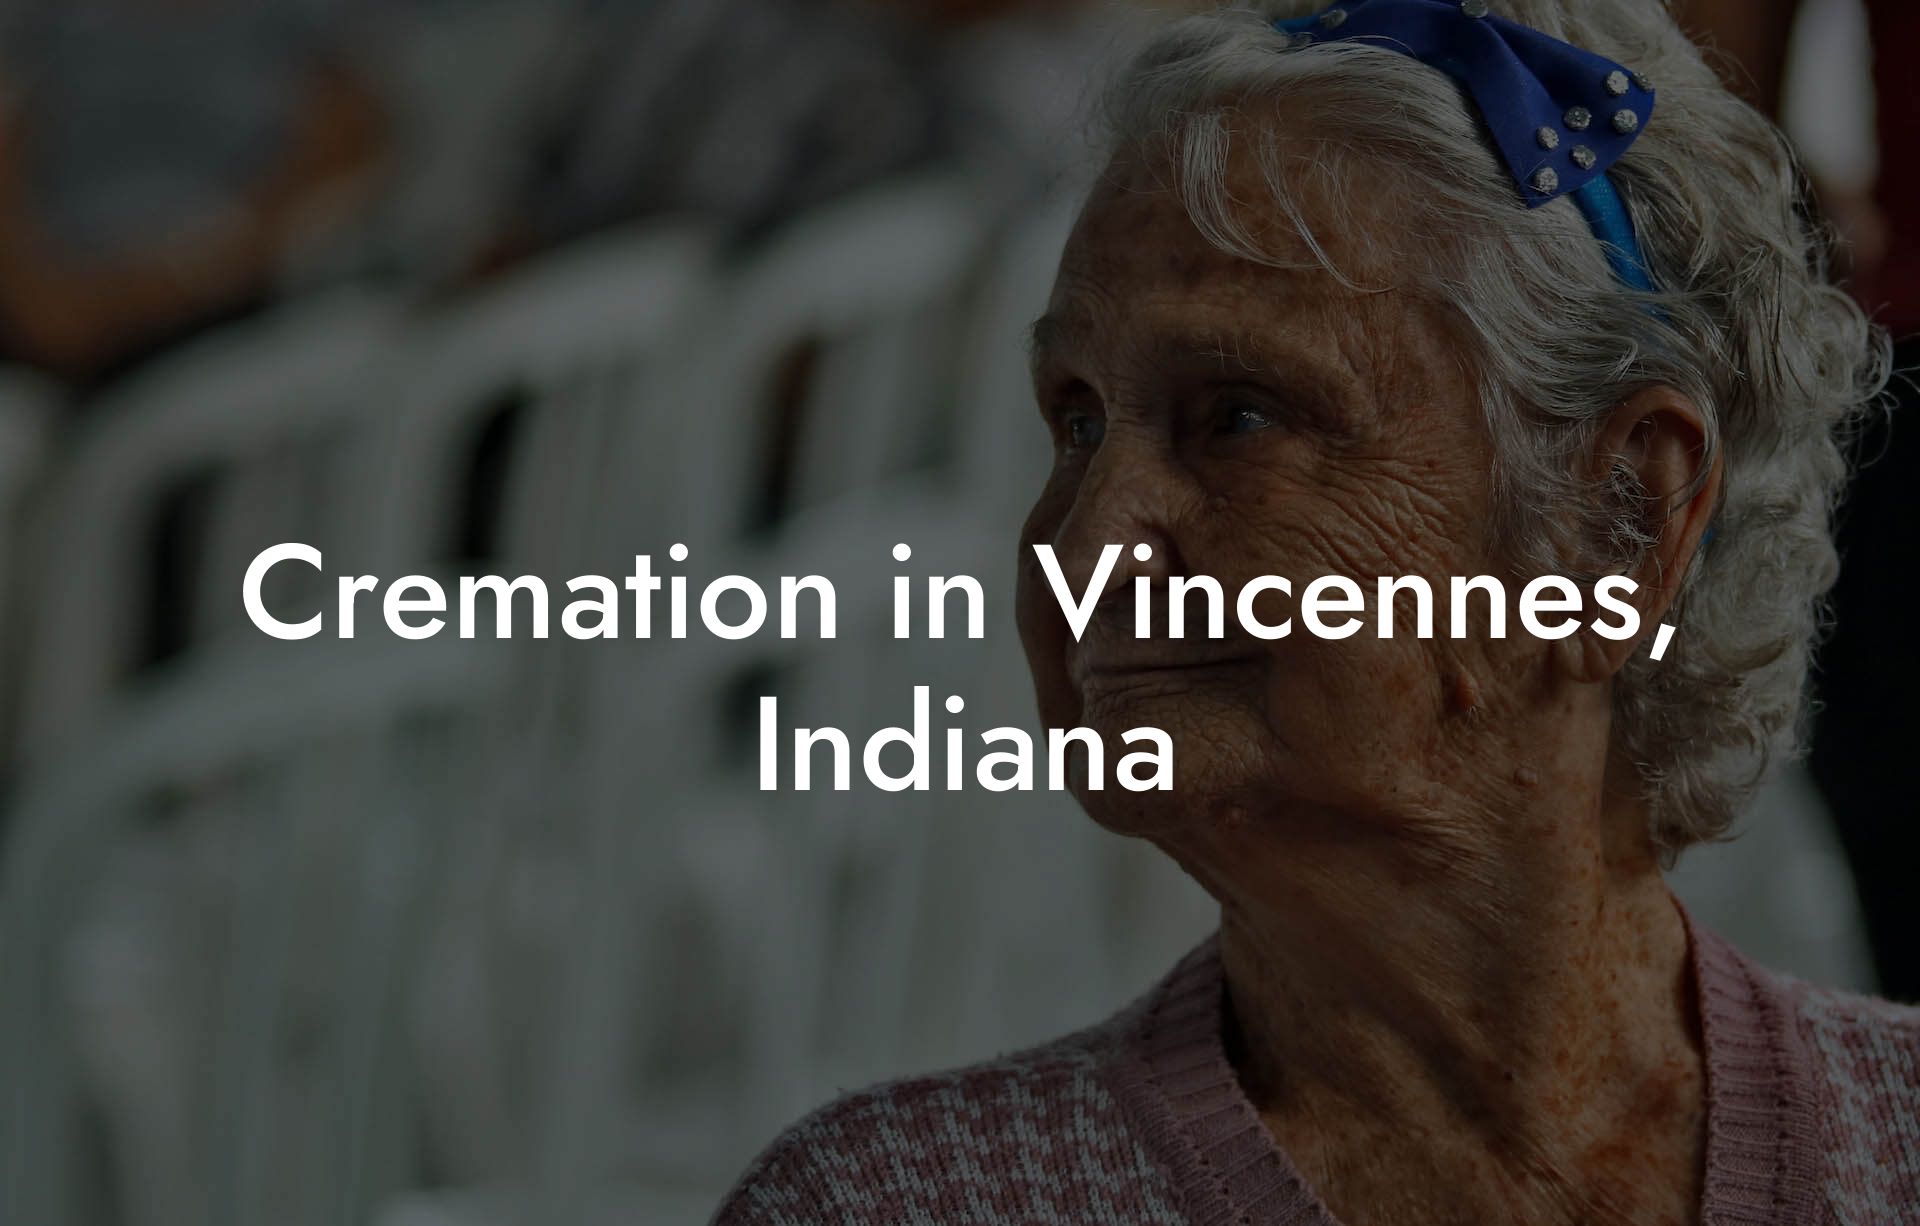 Cremation in Vincennes, Indiana